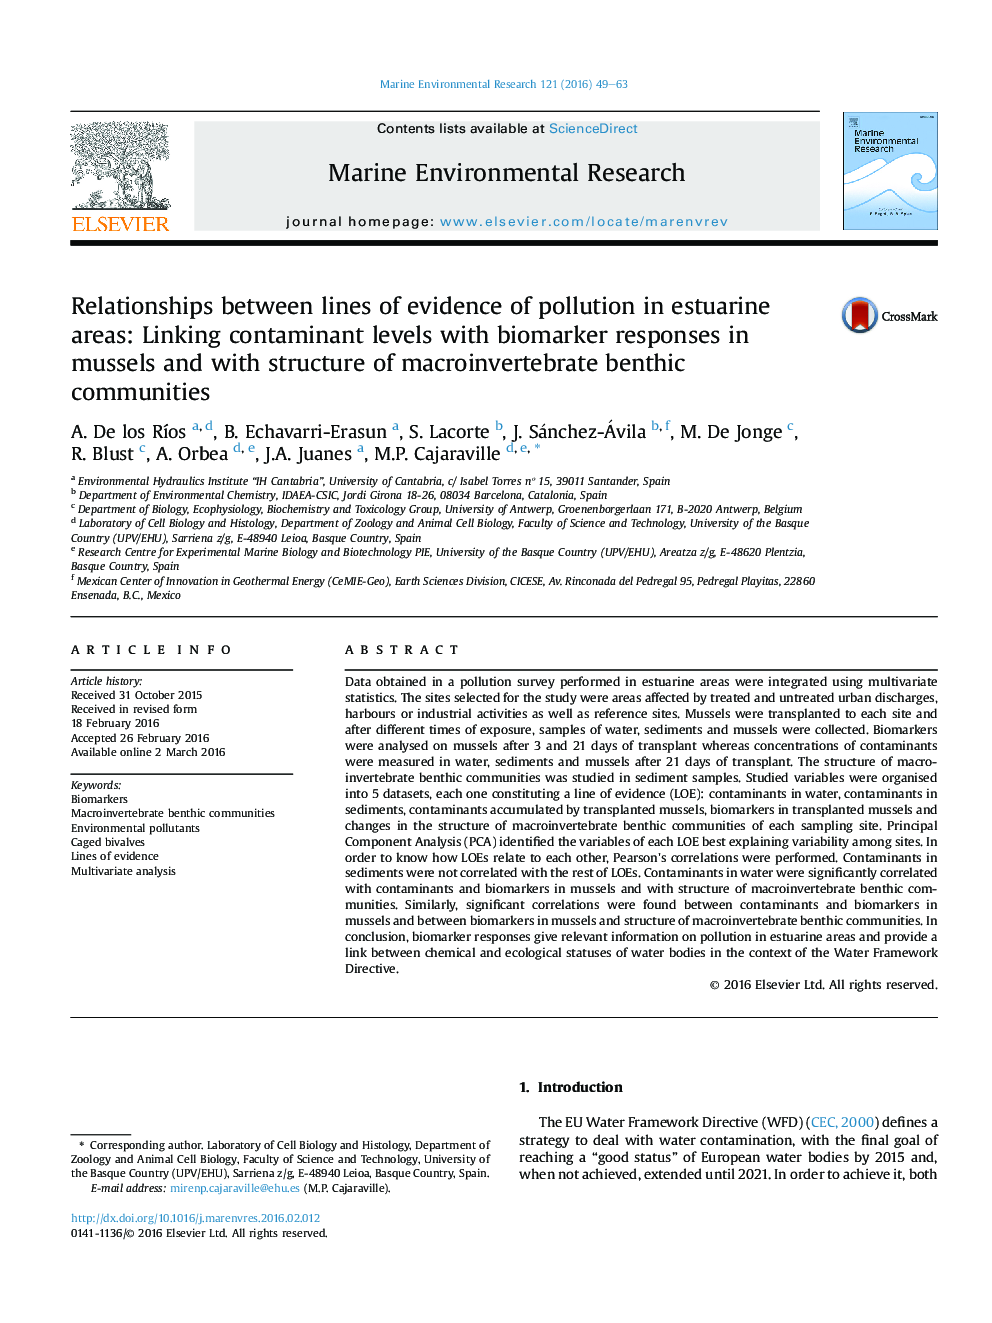 Relationships between lines of evidence of pollution in estuarine areas: Linking contaminant levels with biomarker responses in mussels and with structure of macroinvertebrate benthic communities